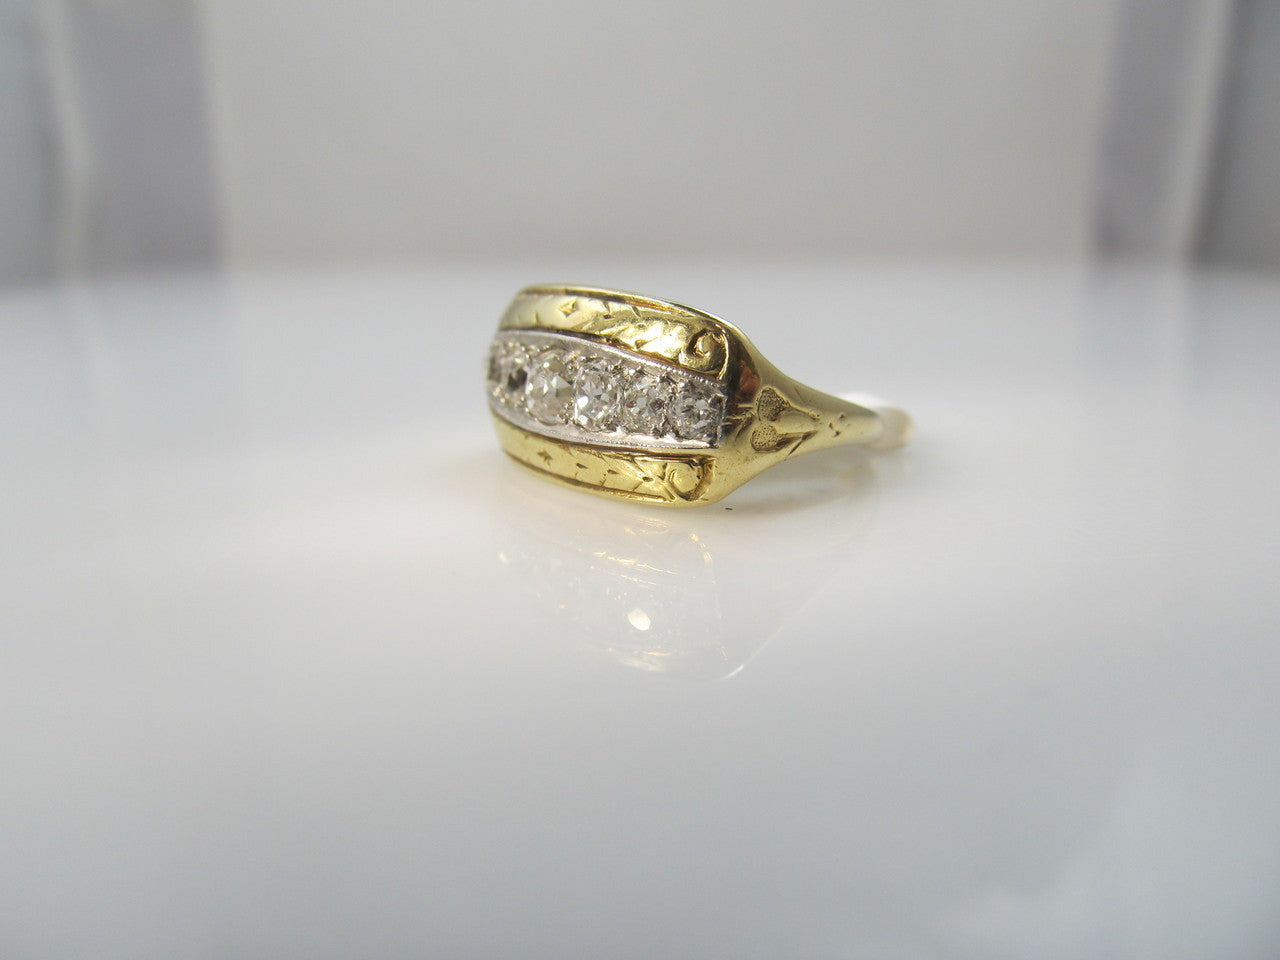 Edwardian 14k Yellow Gold And Platinum Ring With .75cts In Diamonds, Circa 1910.